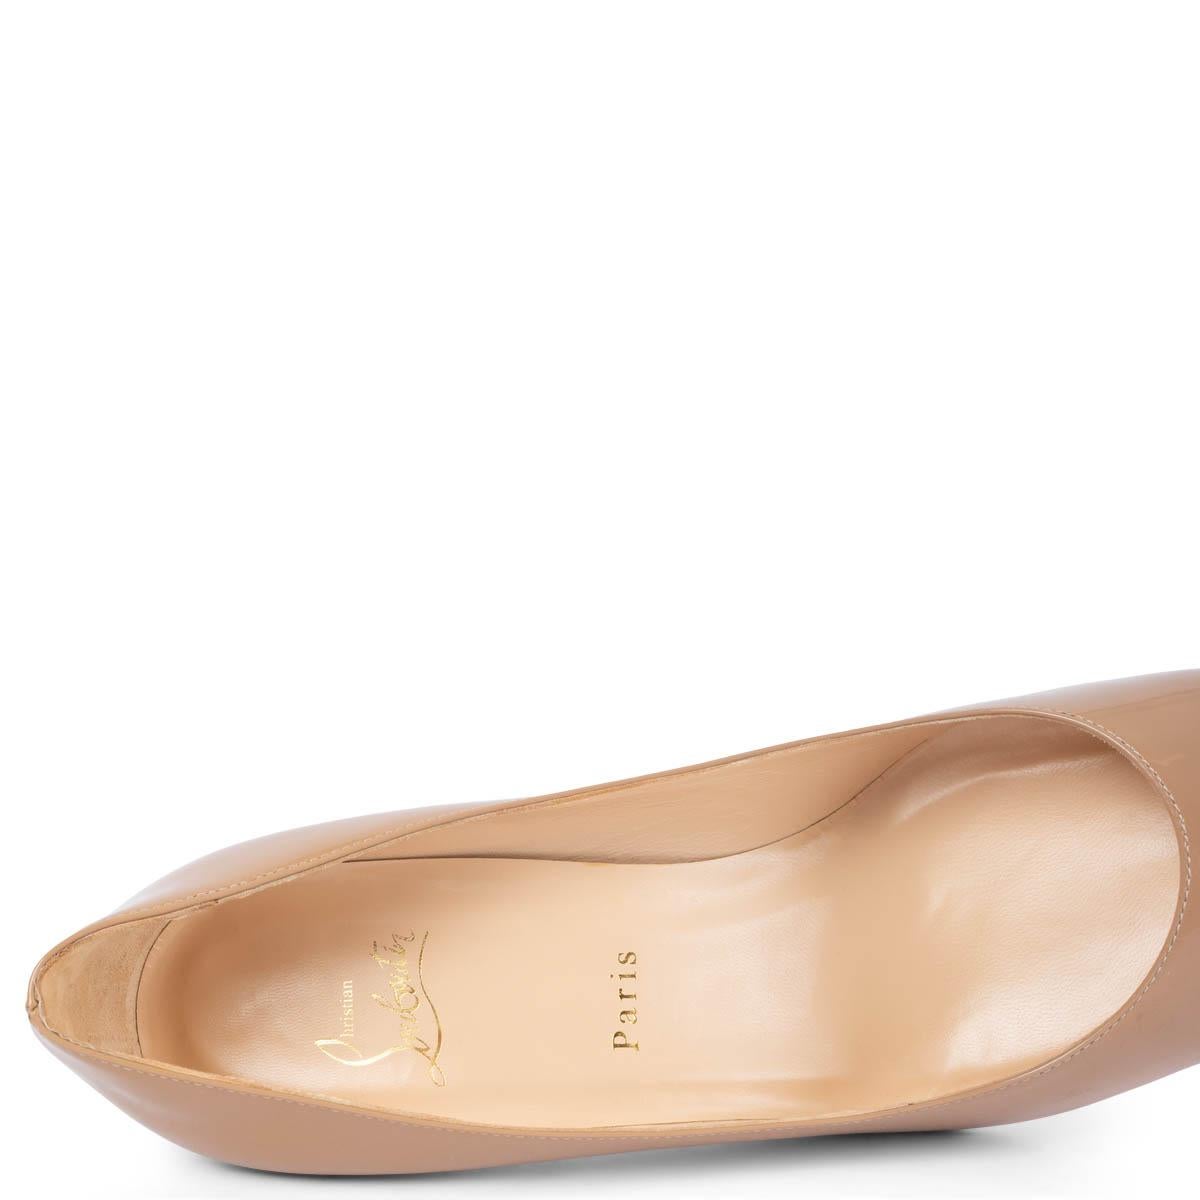 CHRISTIAN LOUBOUTIN nude patent leather SIMPLE 65 Pumps Shoes 41.5 For Sale 1